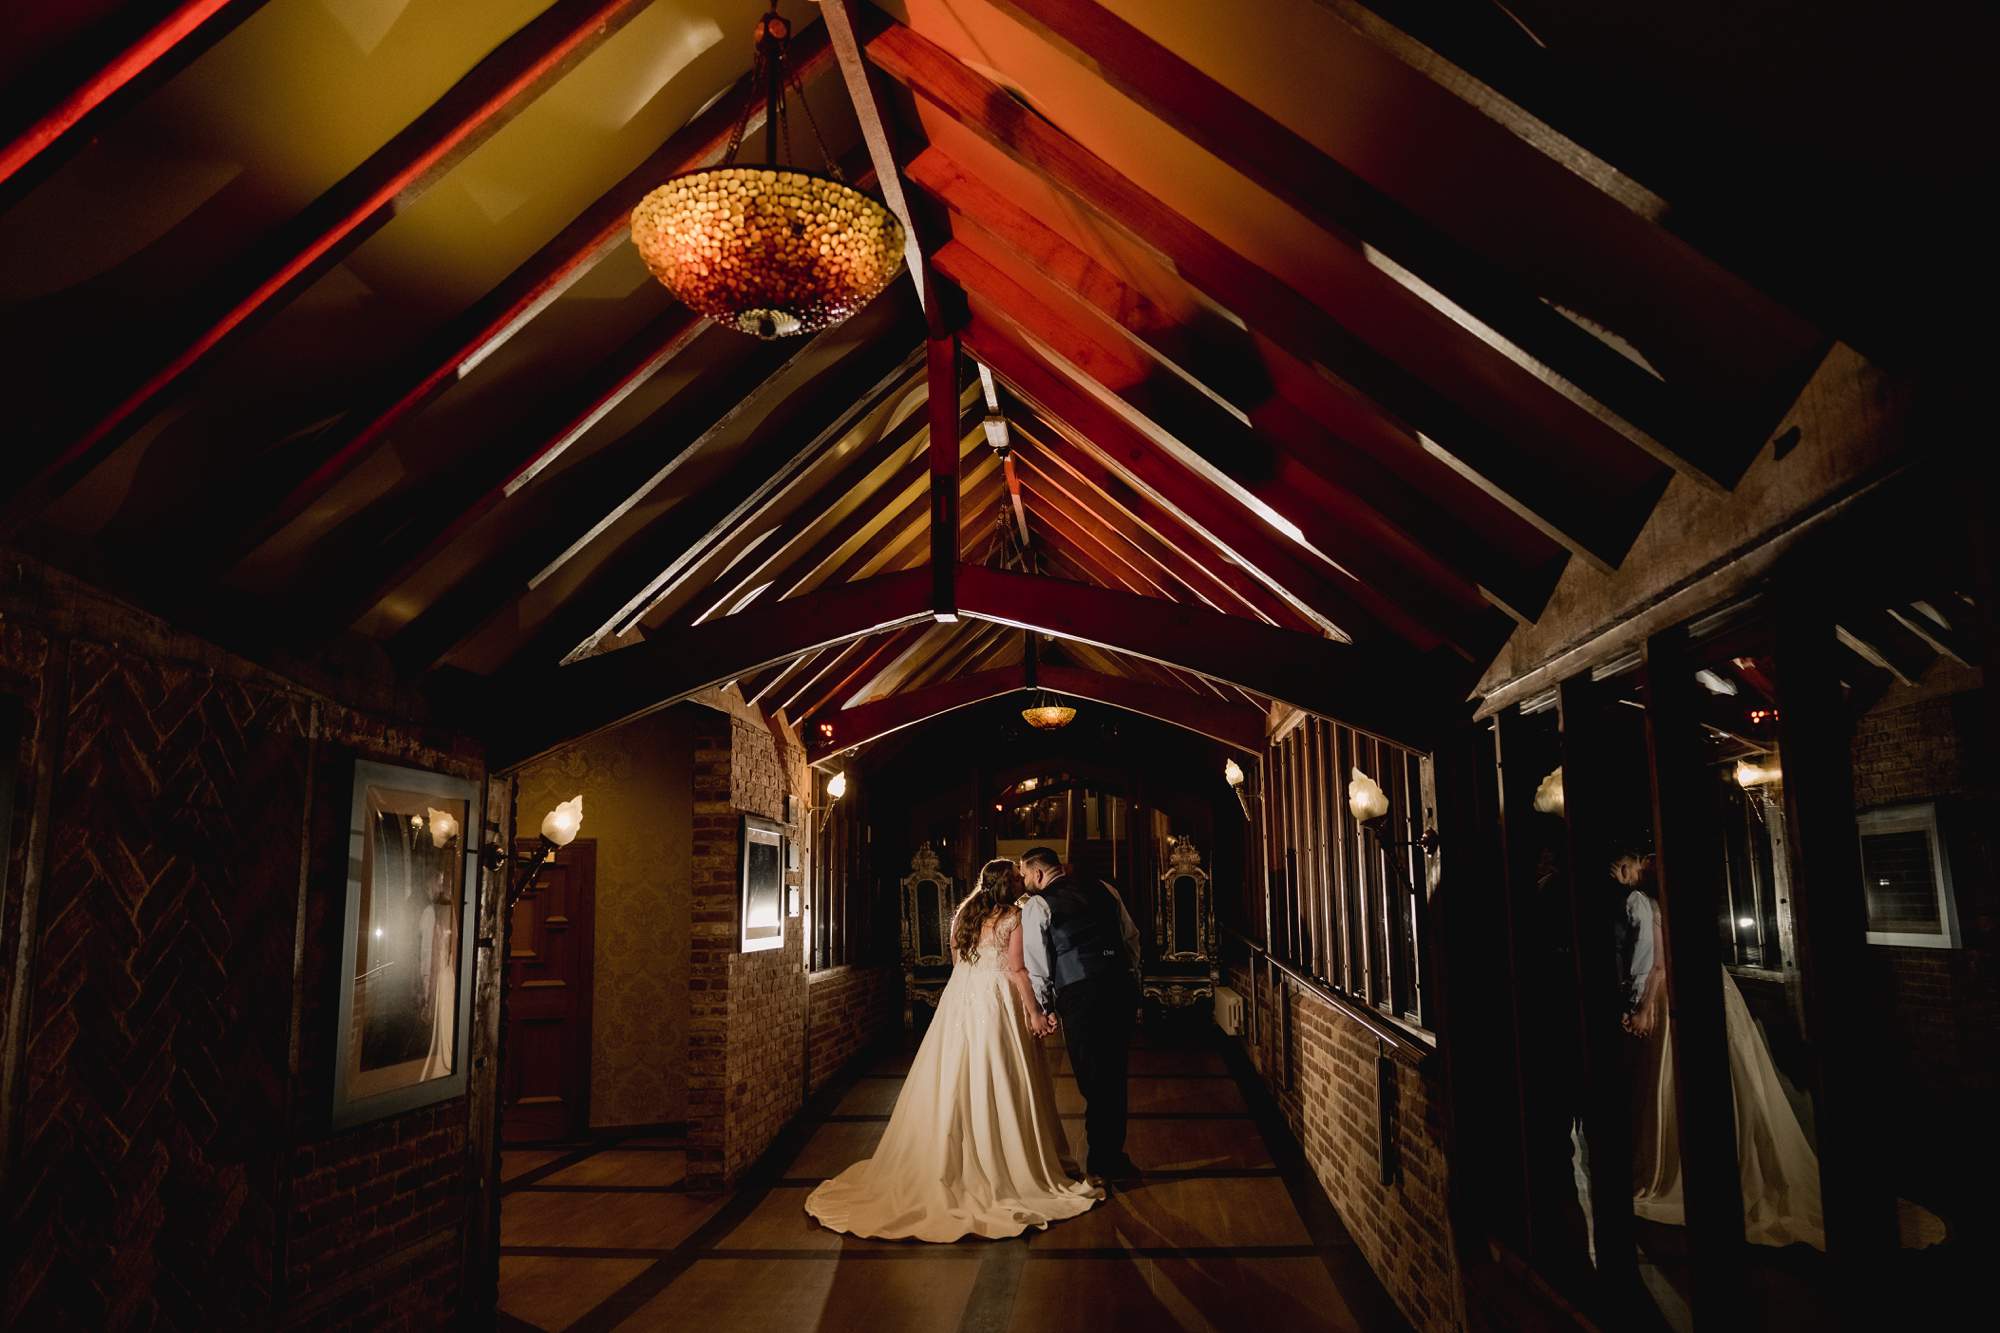 Creative moment with the bride and groom at they take a stroll through the corridors at night at Old Thorns.